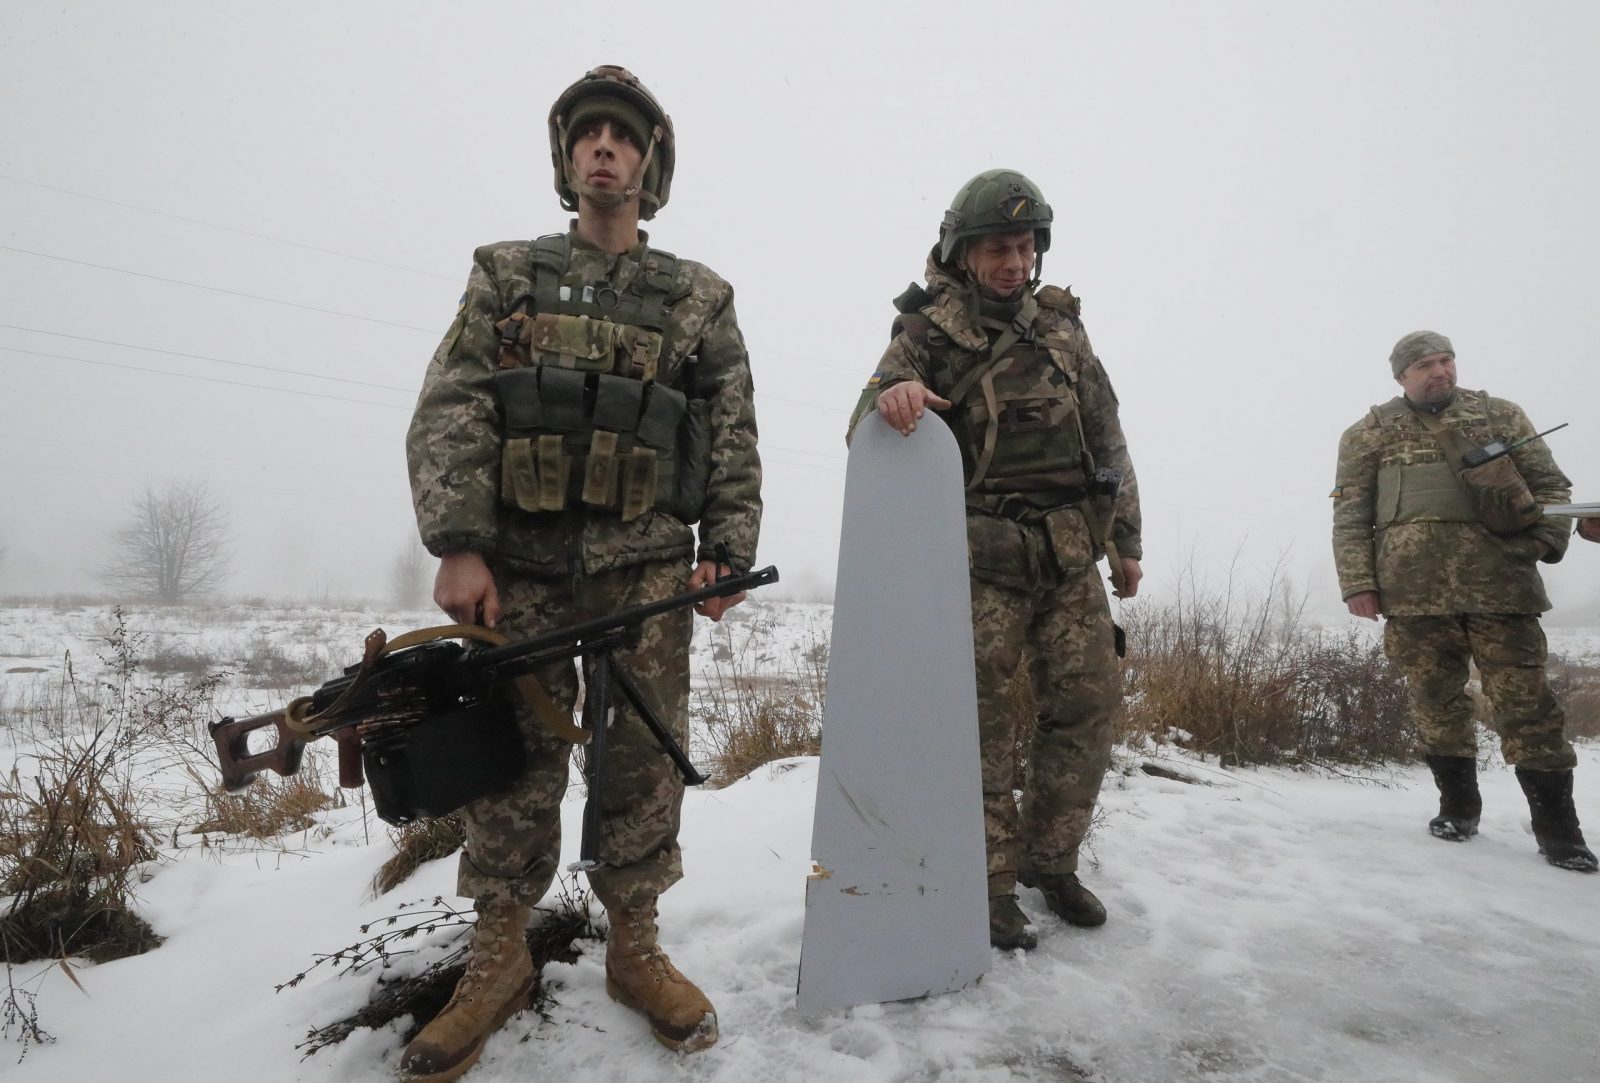 epa10369883 Territorial Defense soldier Oleg Vasylyshyn (L) with his machinegun with which he shot down a Russian rocket Friday, on the outskirts of Kyiv (Kiev), Ukraine, 17 December 2022. According to the Kyiv Military Administration, about 40 missiles were recorded yesterday in the Ukrainian capital's airspace, 37 of which were shot down. A wave of Russian missile attacks on 16 December targeted the Ukrainian capital Kyiv and other parts of the country. Russian troops on 24 February entered Ukrainian territory, starting a conflict that has provoked destruction and a humanitarian crisis.  EPA/SERGEY DOLZHENKO